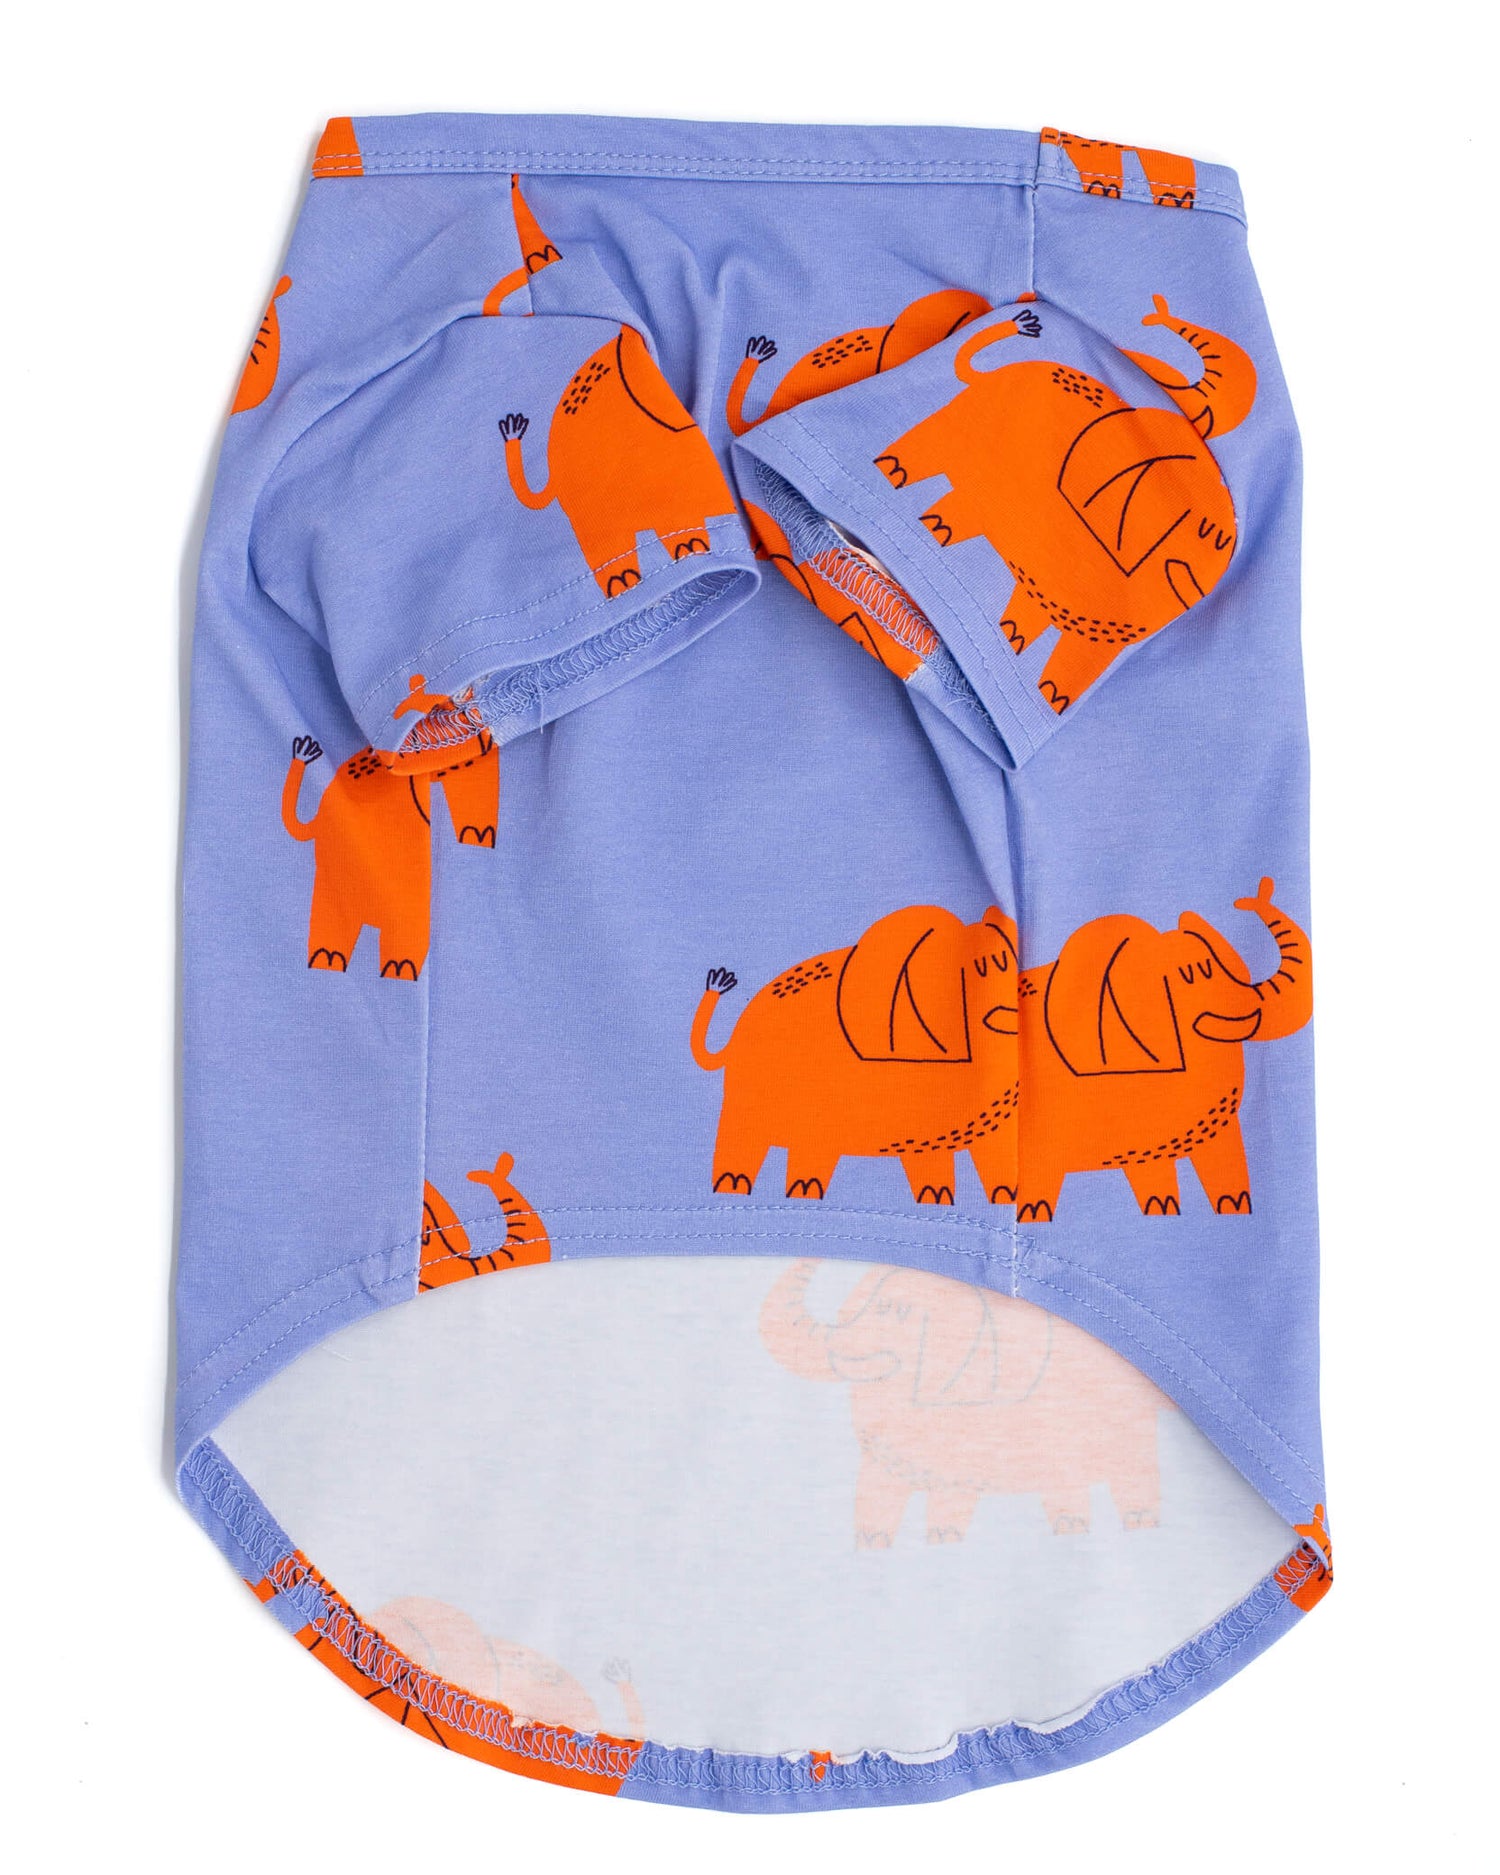 Front view of Vibrant Hound Dog shirt. It has purple clothes and orange elephants printed on it.